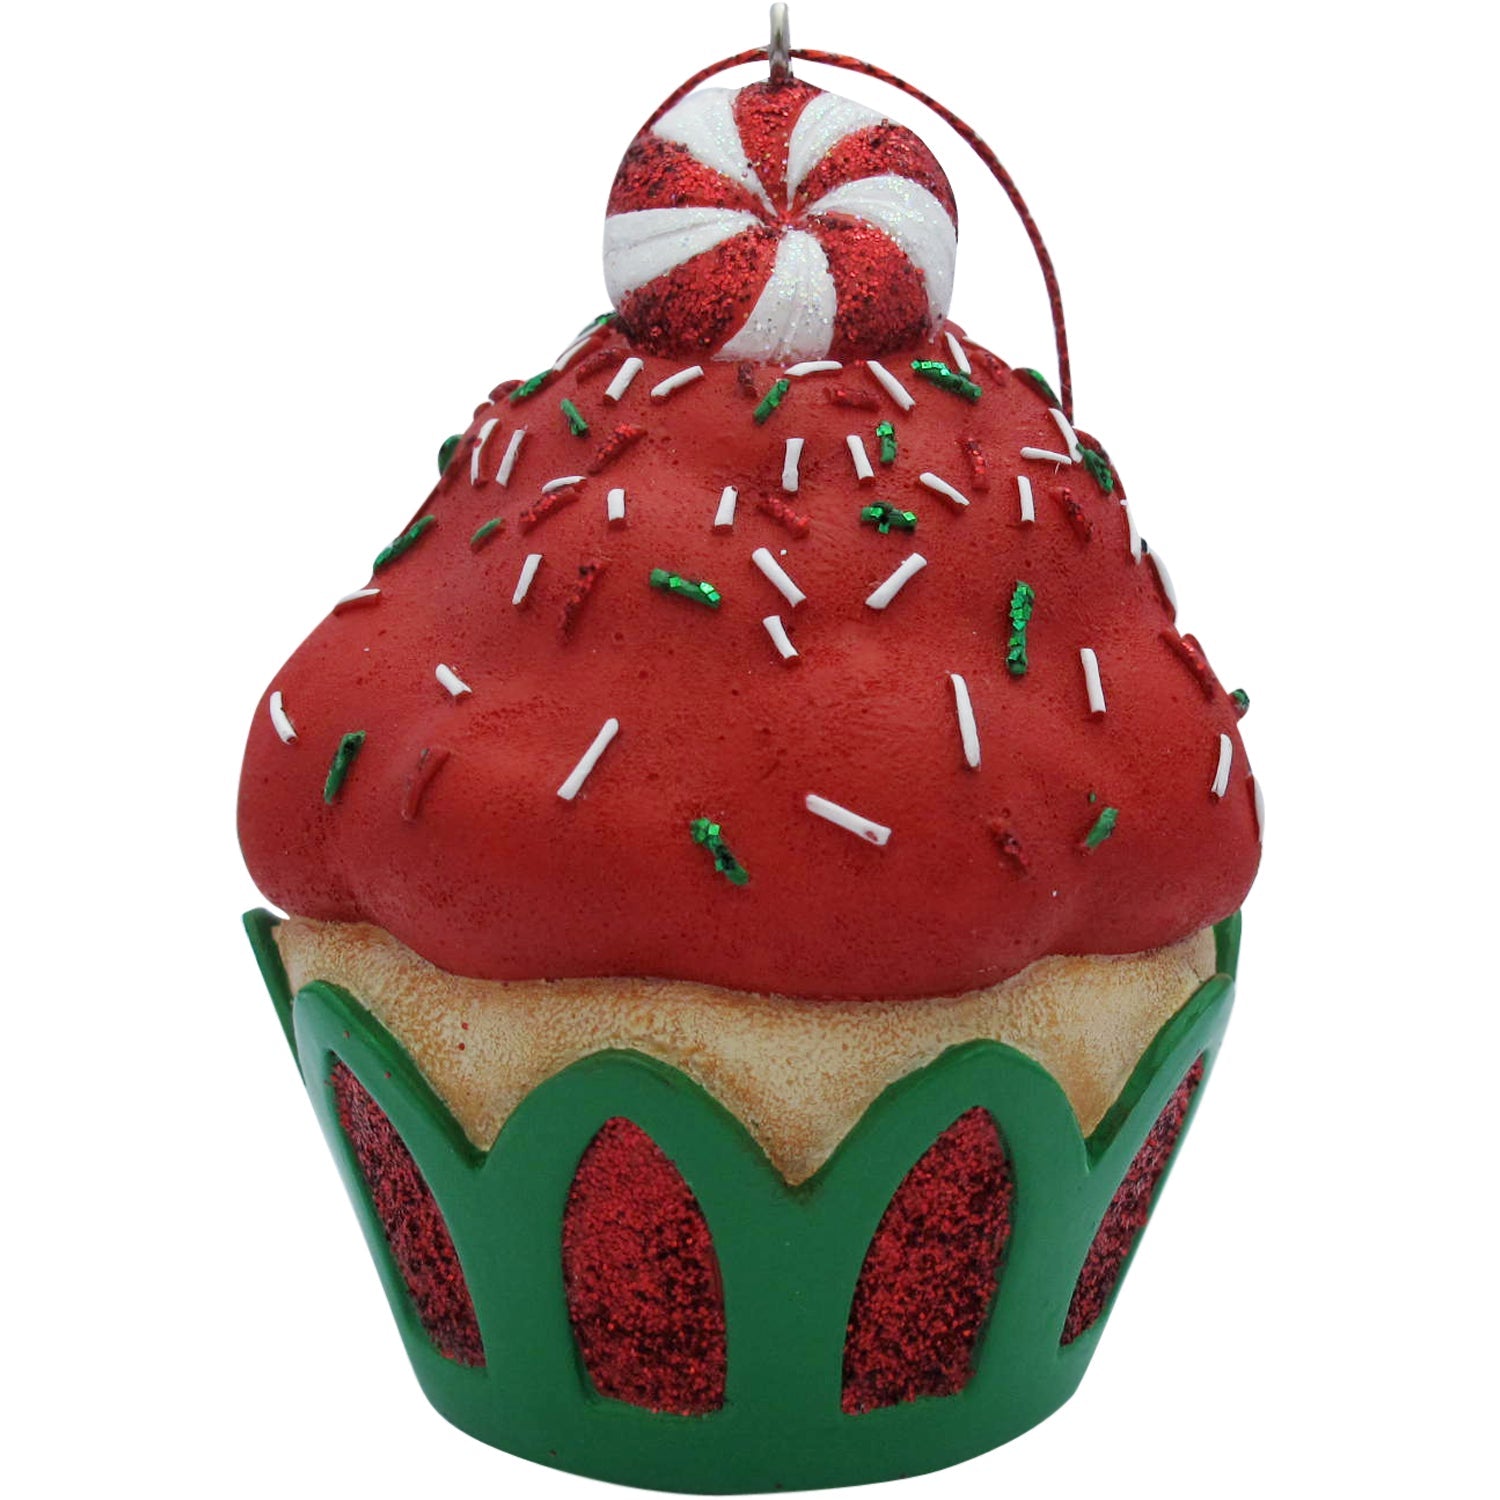 Red Peppermint Top Cupcake Christmas Tree Ornament